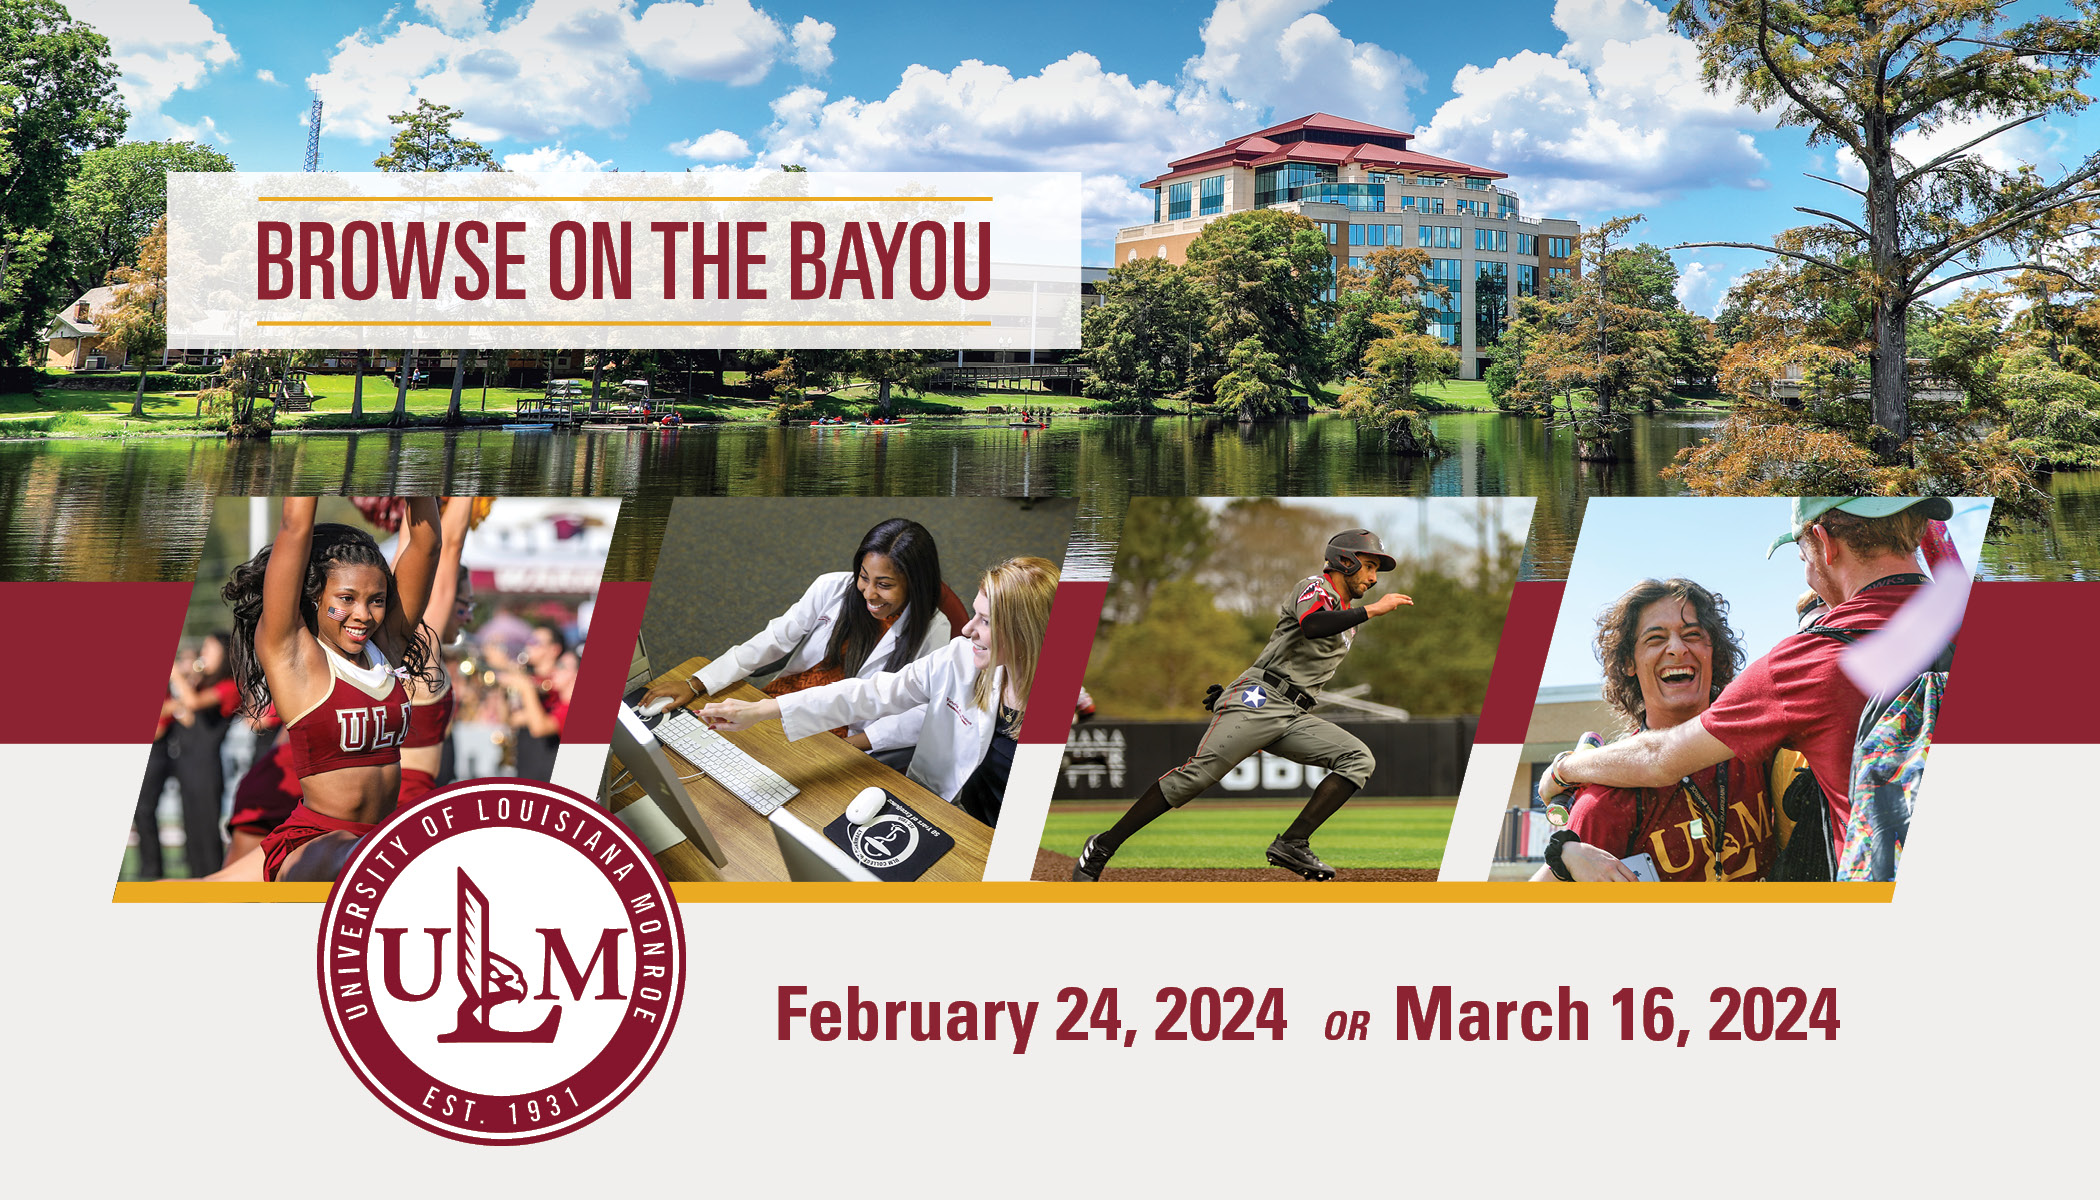 Four photos (a cheerleader, two students pointing at a computer, a baseball player, and two students smiling and embracing) layover an image of a tall building overlooking a bayou. People are kayaking on the bayou. ULM's logo is in the corner. Text reads, "February 24, 2024 or March 16, 2024"